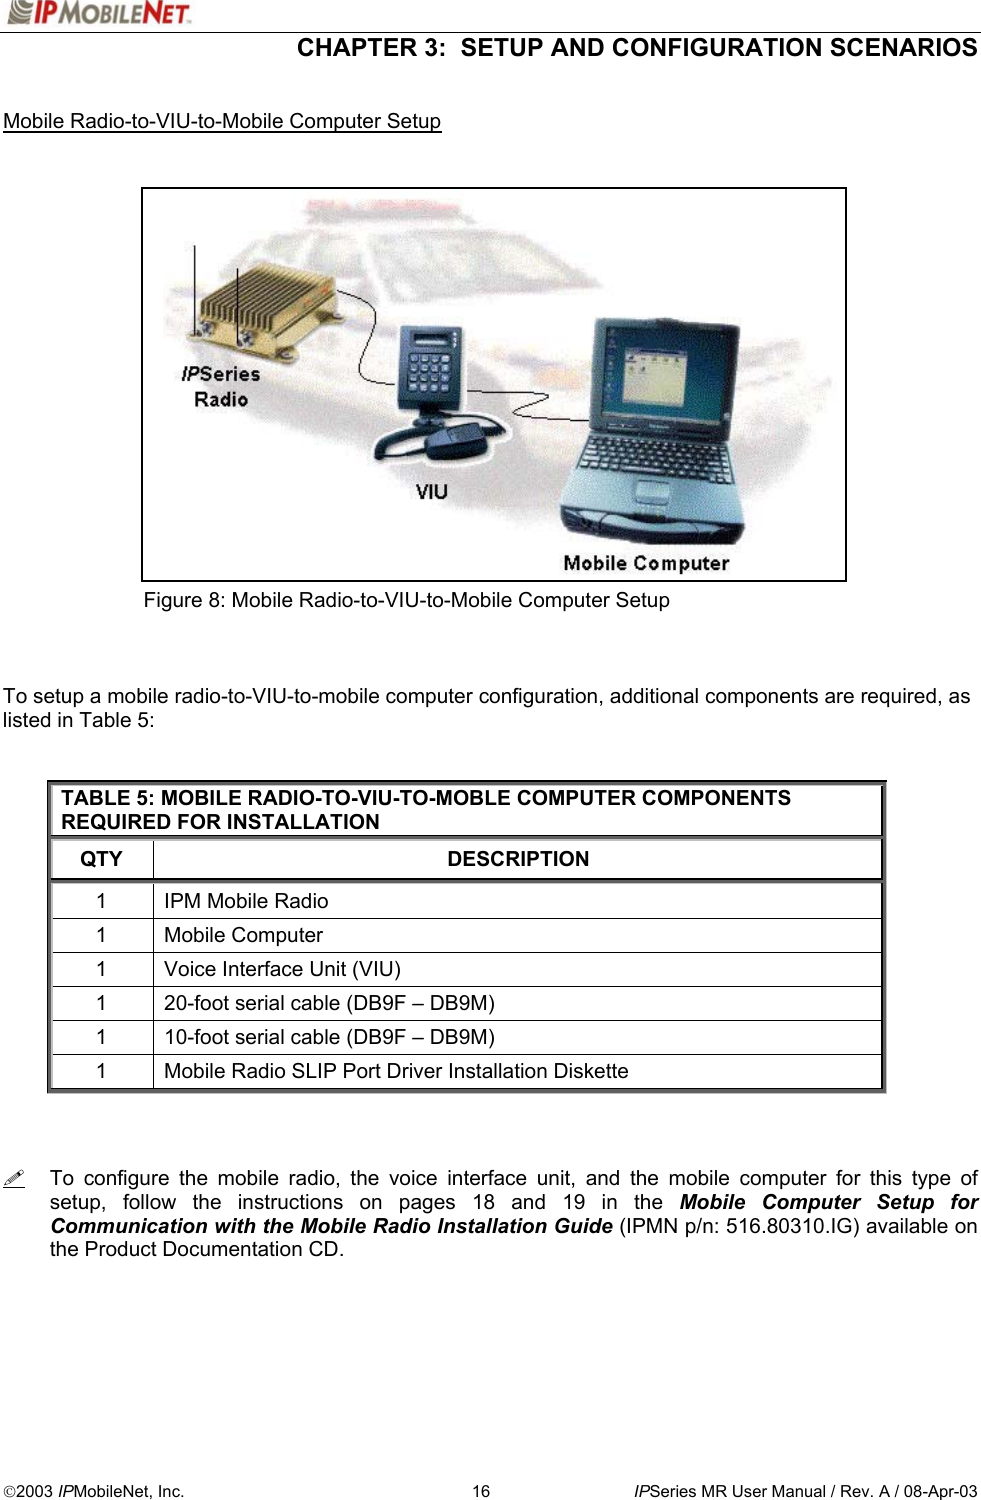  CHAPTER 3:  SETUP AND CONFIGURATION SCENARIOS  2003 IPMobileNet, Inc.  16  IPSeries MR User Manual / Rev. A / 08-Apr-03  Mobile Radio-to-VIU-to-Mobile Computer Setup                    Figure 8: Mobile Radio-to-VIU-to-Mobile Computer Setup    To setup a mobile radio-to-VIU-to-mobile computer configuration, additional components are required, as listed in Table 5:   TABLE 5: MOBILE RADIO-TO-VIU-TO-MOBLE COMPUTER COMPONENTS REQUIRED FOR INSTALLATION QTY DESCRIPTION 1  IPM Mobile Radio 1 Mobile Computer 1  Voice Interface Unit (VIU) 1  20-foot serial cable (DB9F – DB9M) 1  10-foot serial cable (DB9F – DB9M) 1  Mobile Radio SLIP Port Driver Installation Diskette     To configure the mobile radio, the voice interface unit, and the mobile computer for this type of setup, follow the instructions on pages 18 and 19 in the Mobile Computer Setup for Communication with the Mobile Radio Installation Guide (IPMN p/n: 516.80310.IG) available on the Product Documentation CD.    